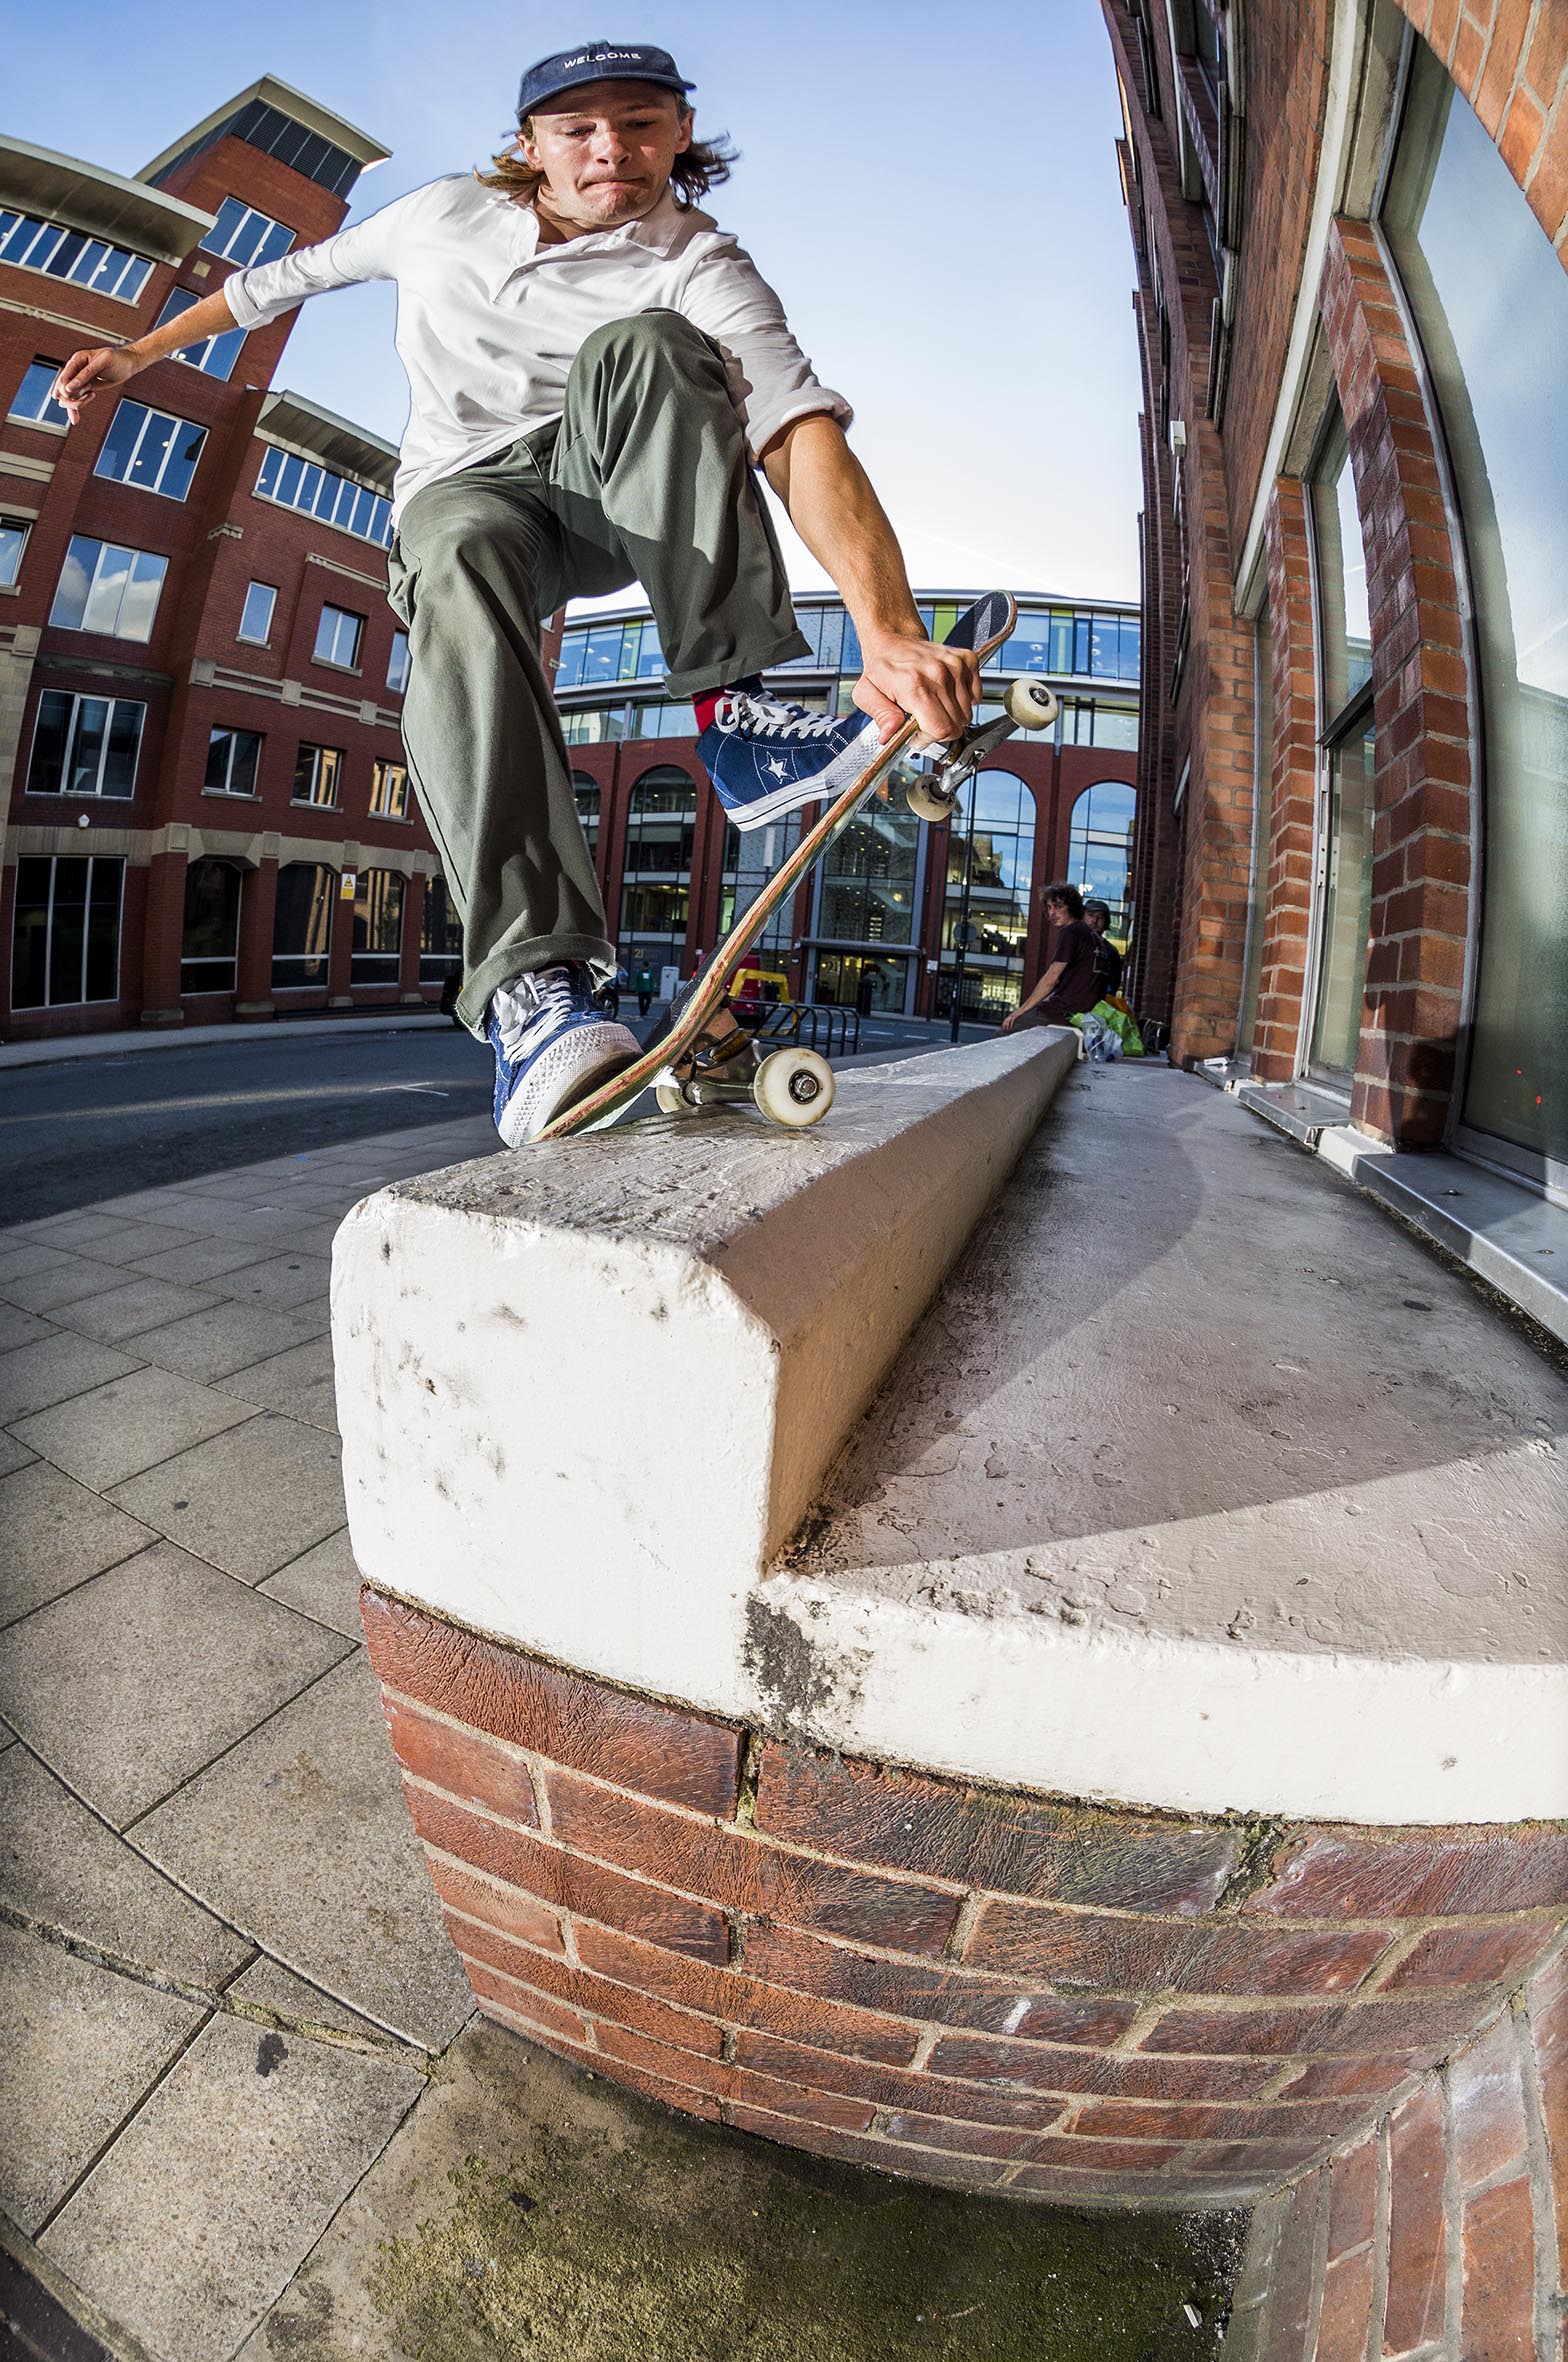 Liam Hobson - chuck on nosegrind